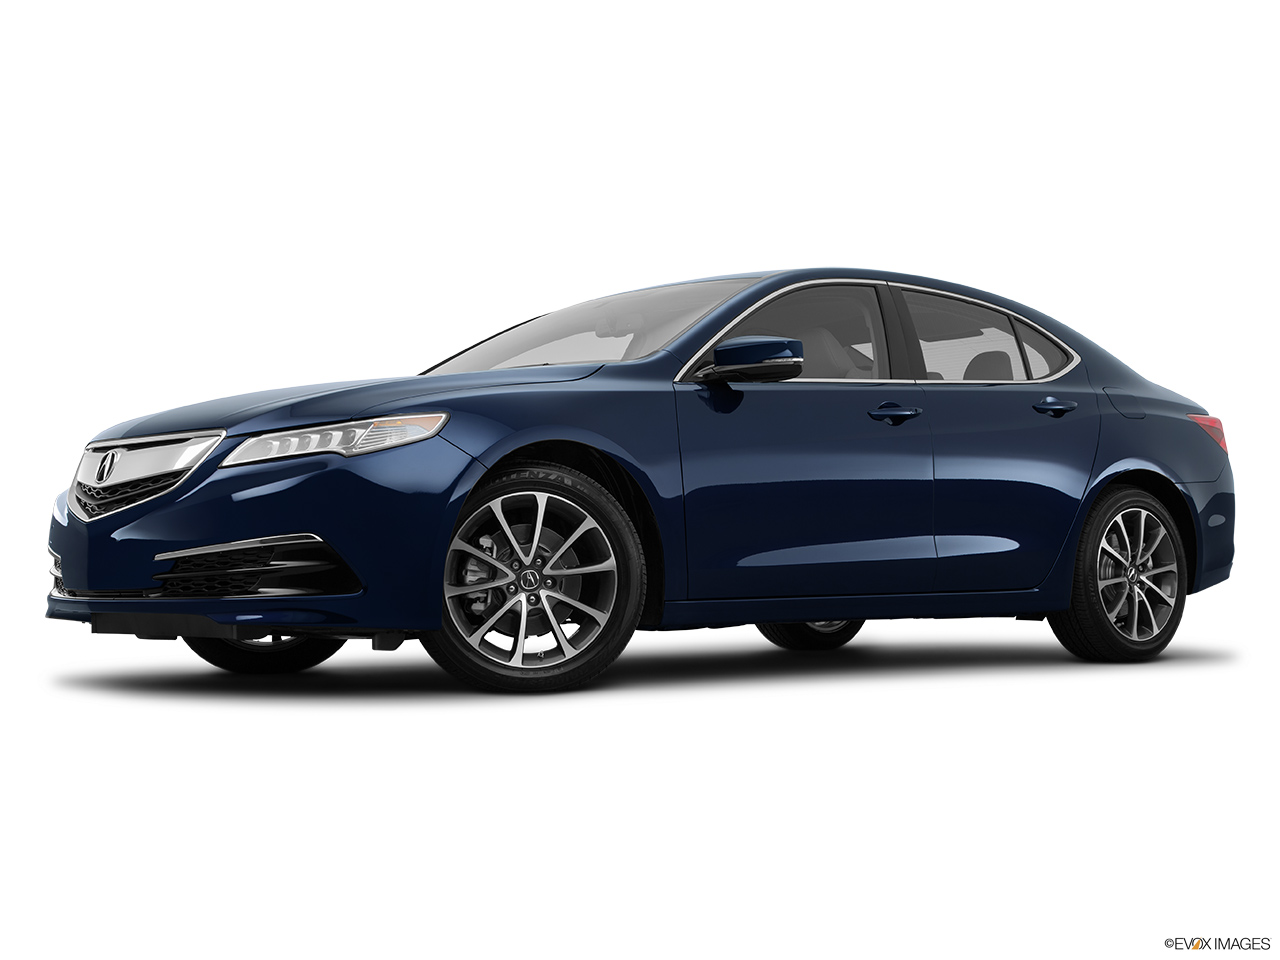 2015 Acura TLX 3.5 V-6 9-AT P-AWS Low/wide front 5/8. 